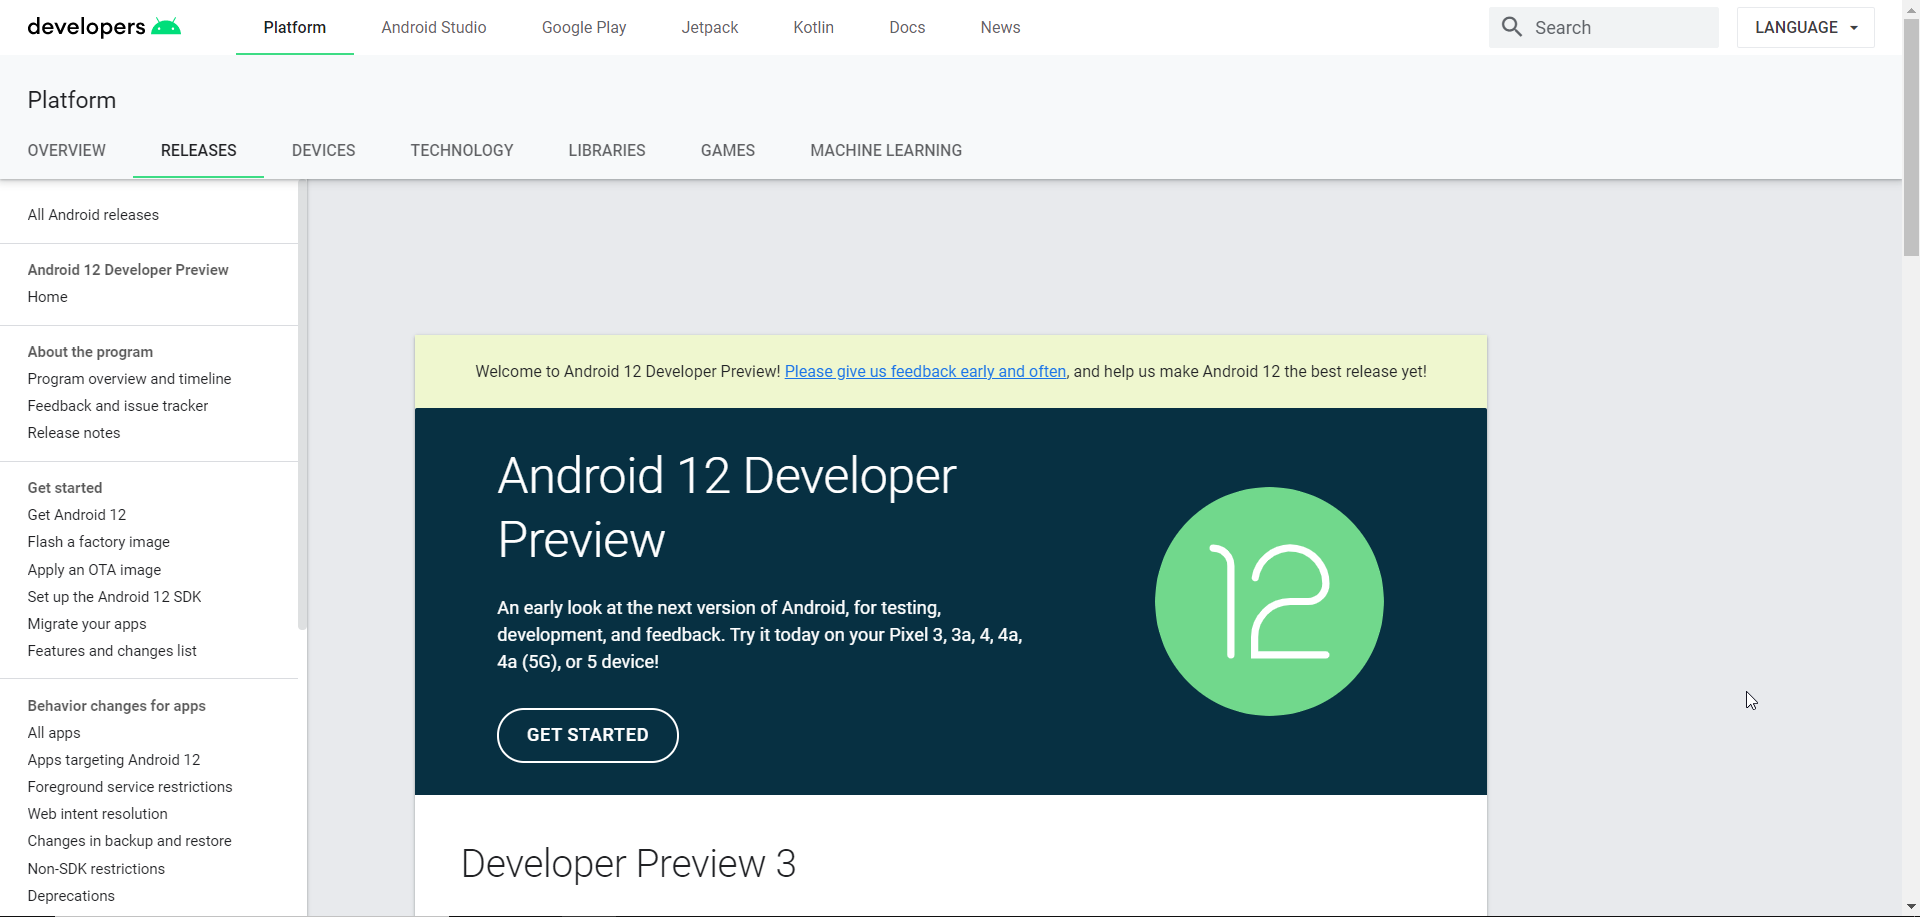 Android developer website gets a redesign ahead of I/O - 9to5Google